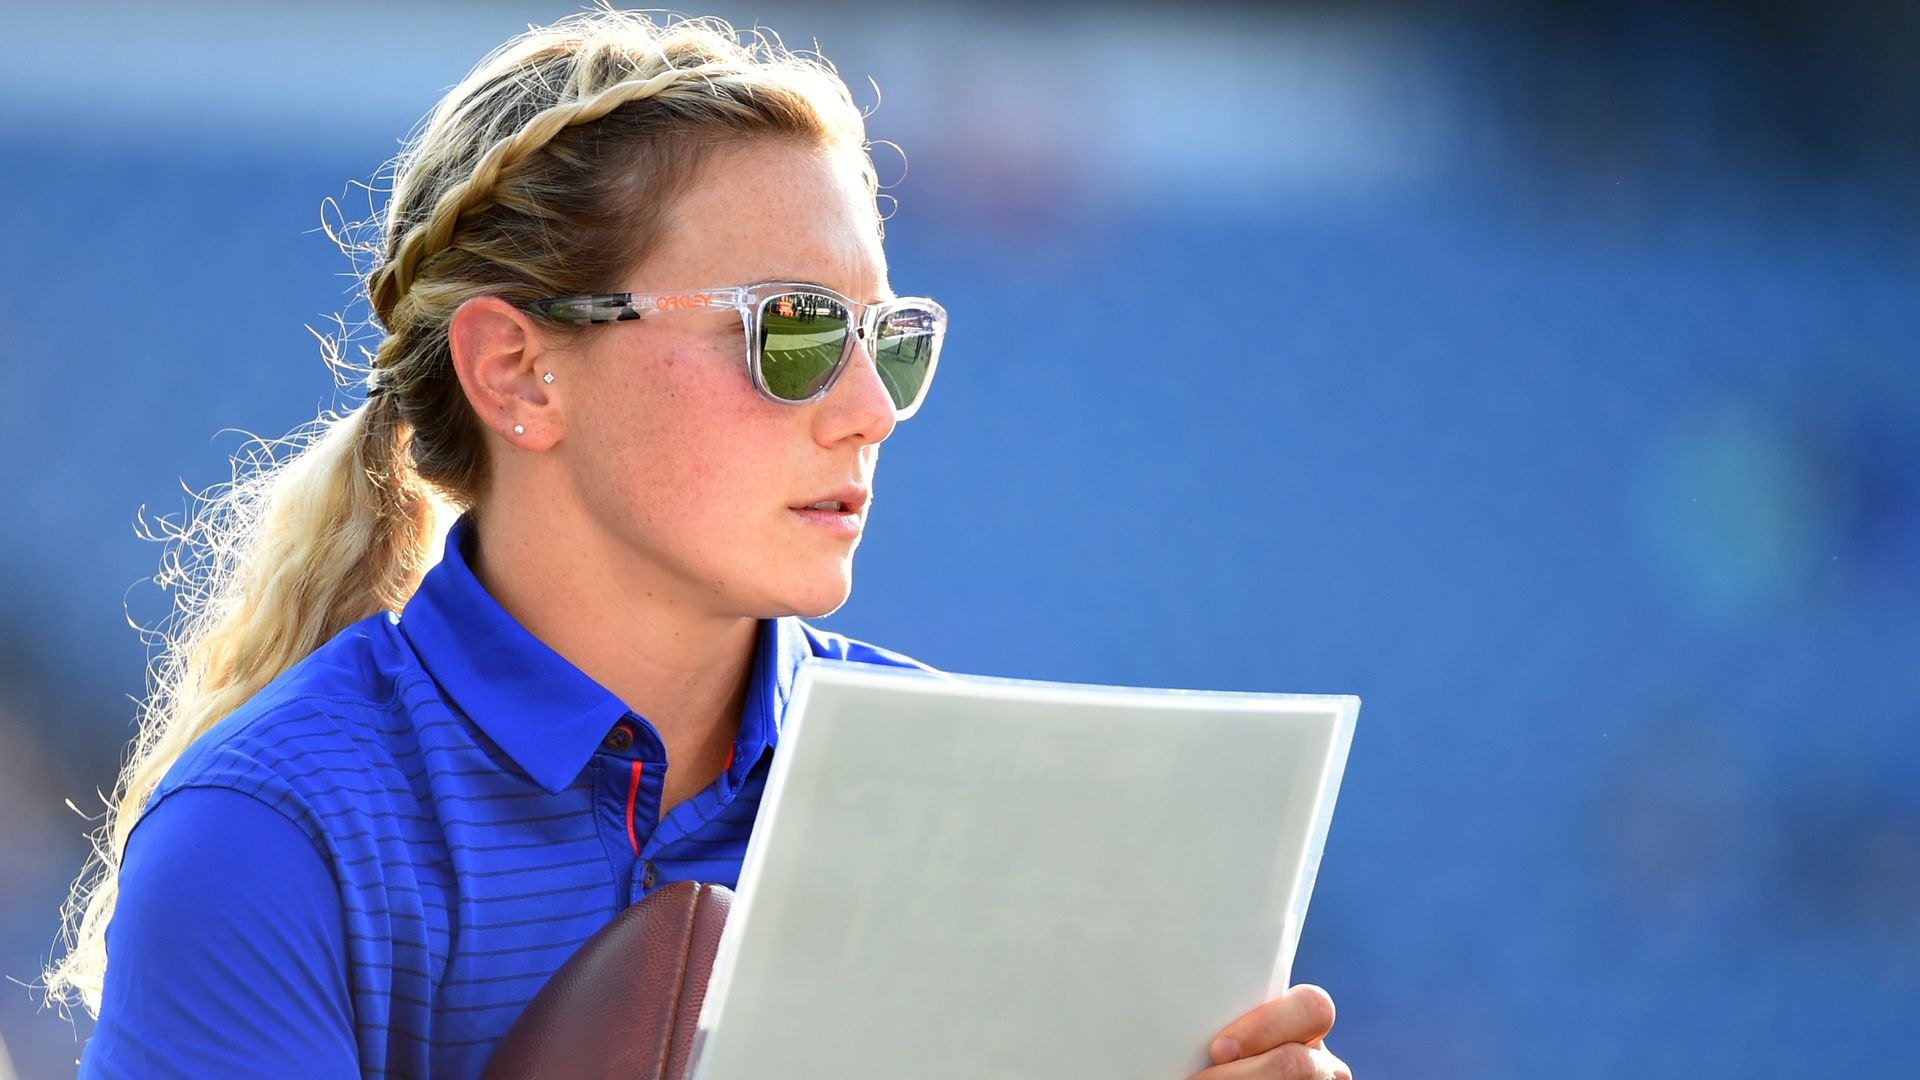 Phoebe Schecter | Britain's first female NFL coach charts rapid rise to top